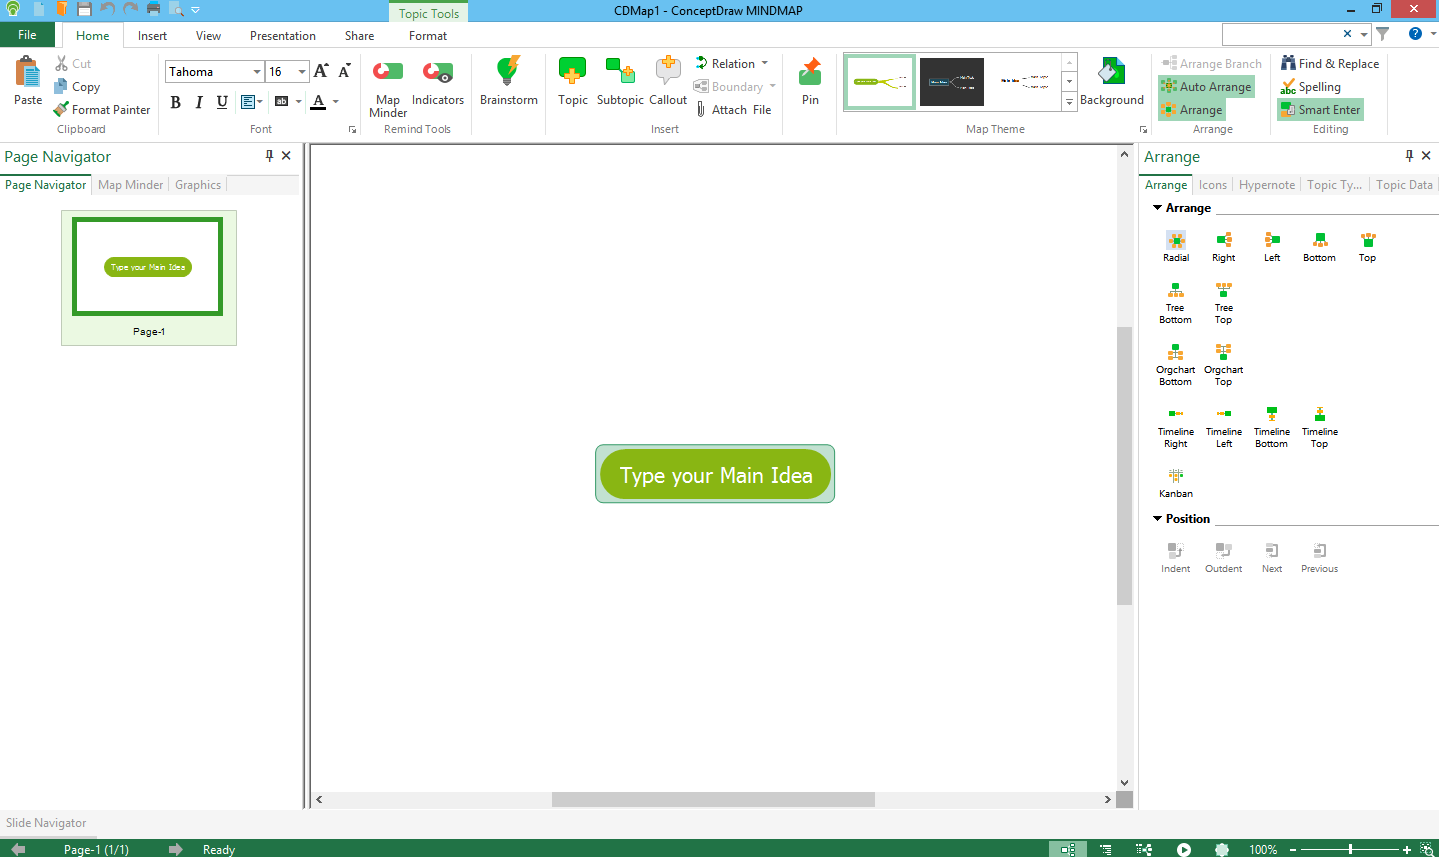 conceptdraw office 3 torrent